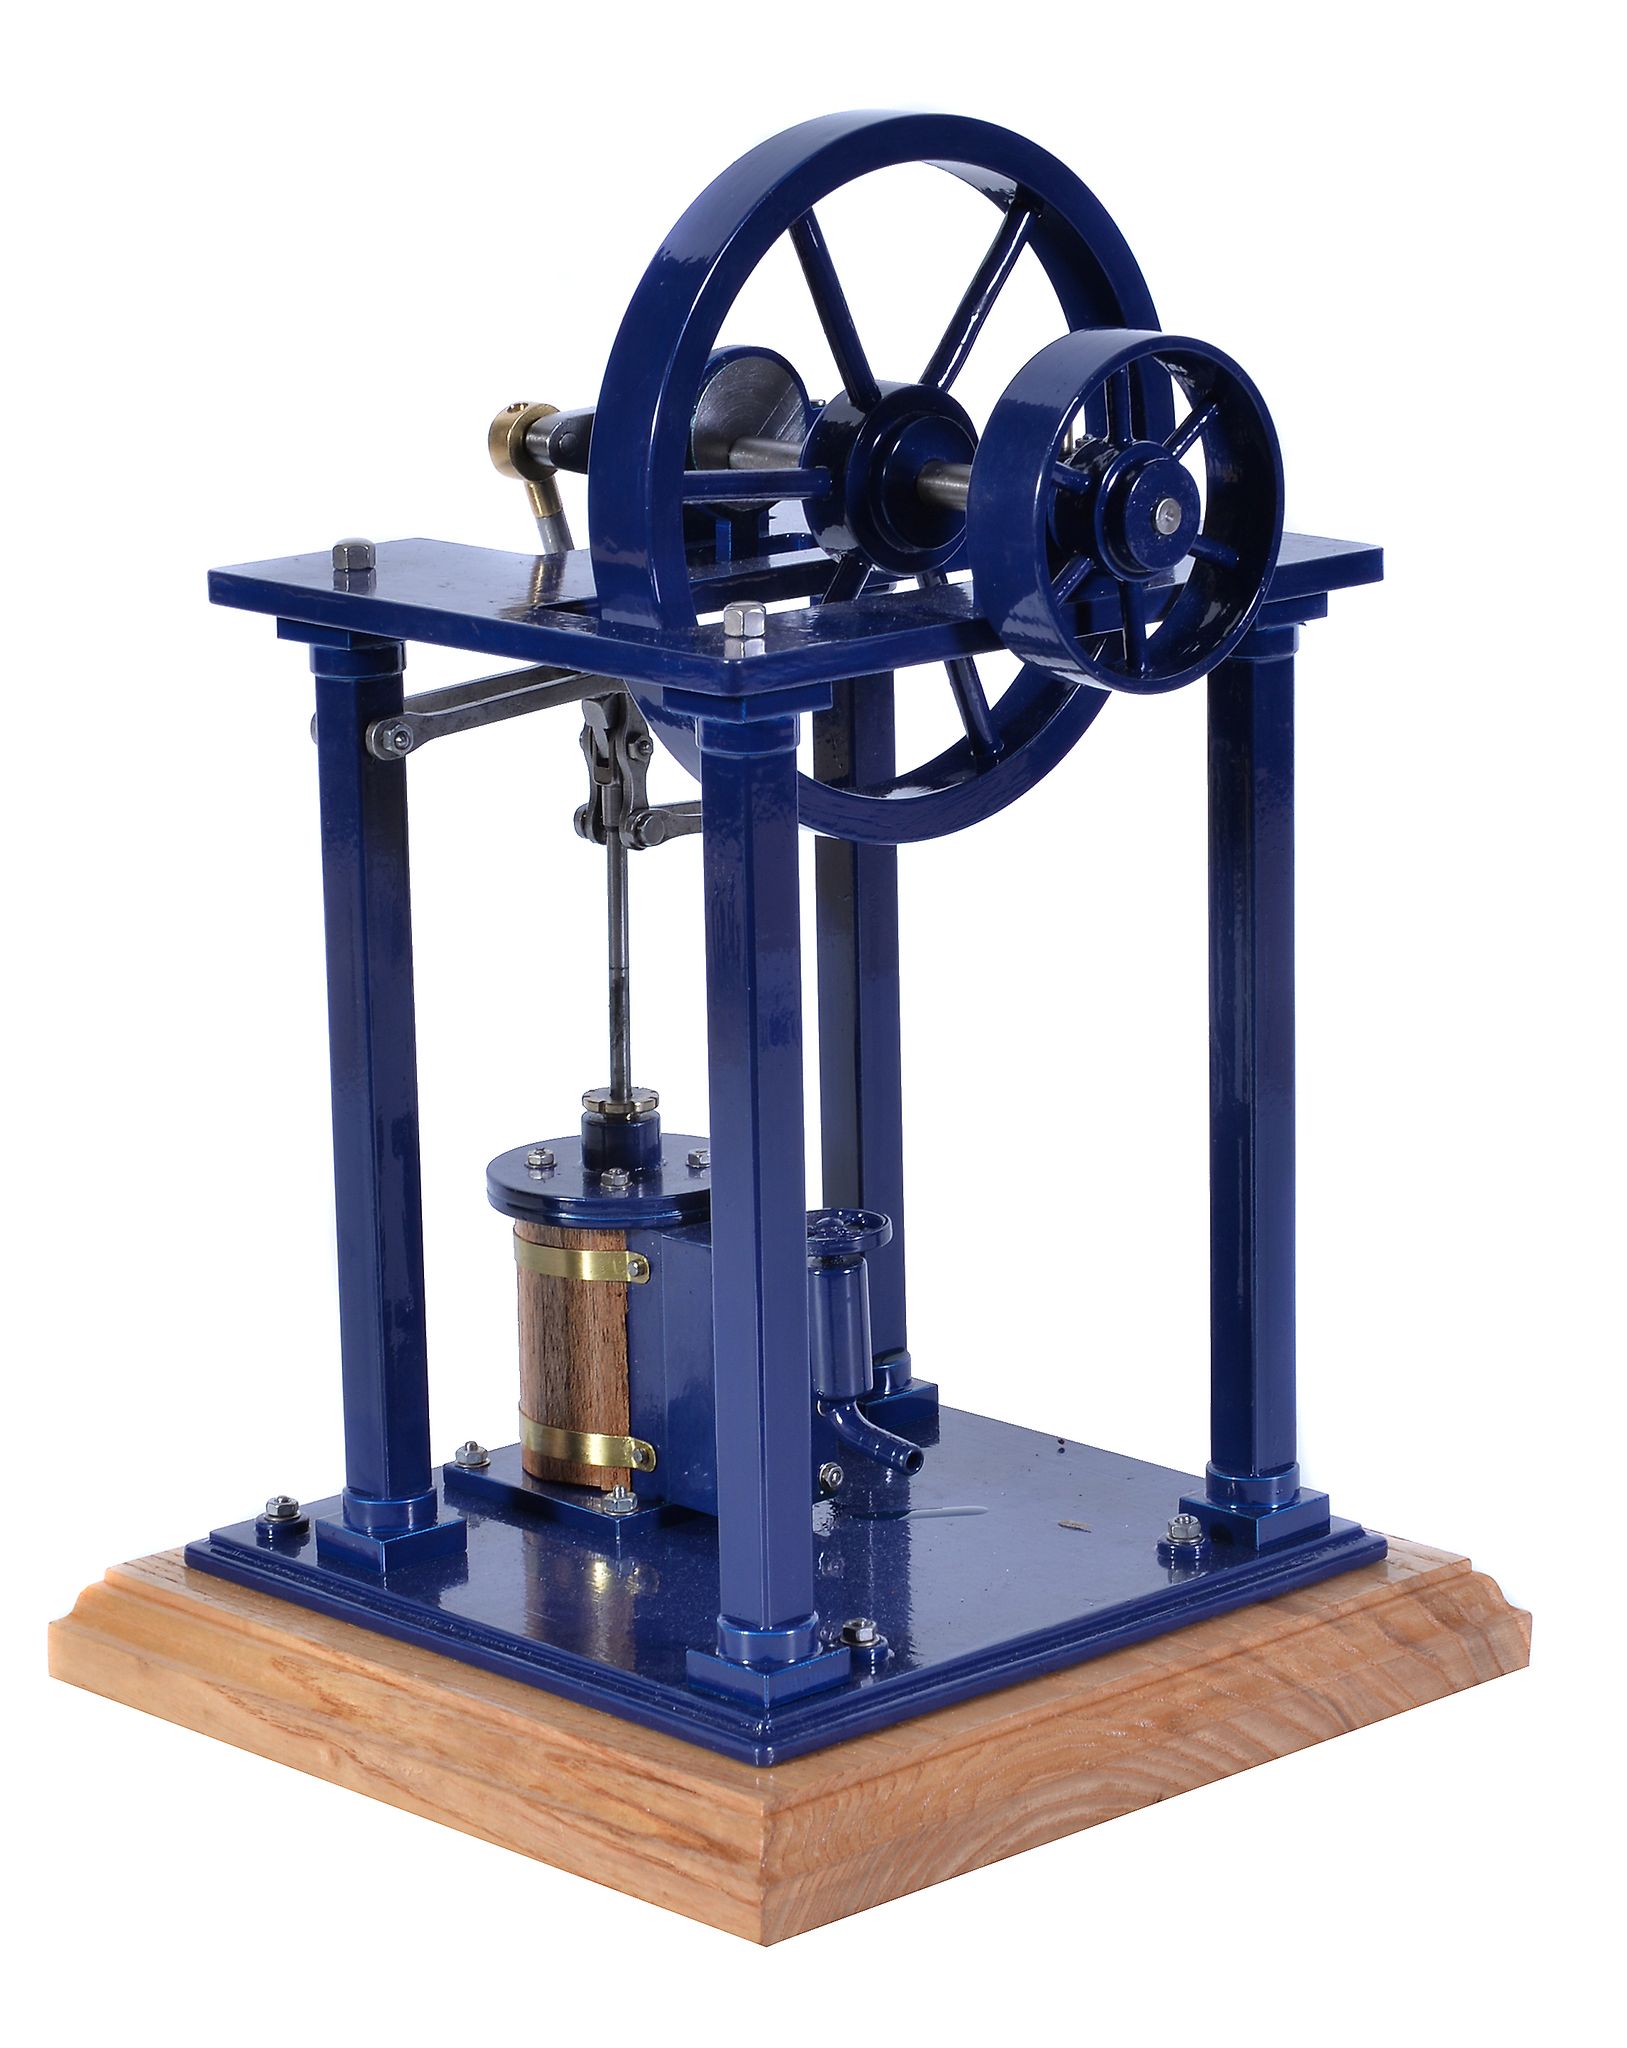 A well-engineered model of an over-type vertical live steam mill engine, built by Mr D. Russell of - Image 2 of 3